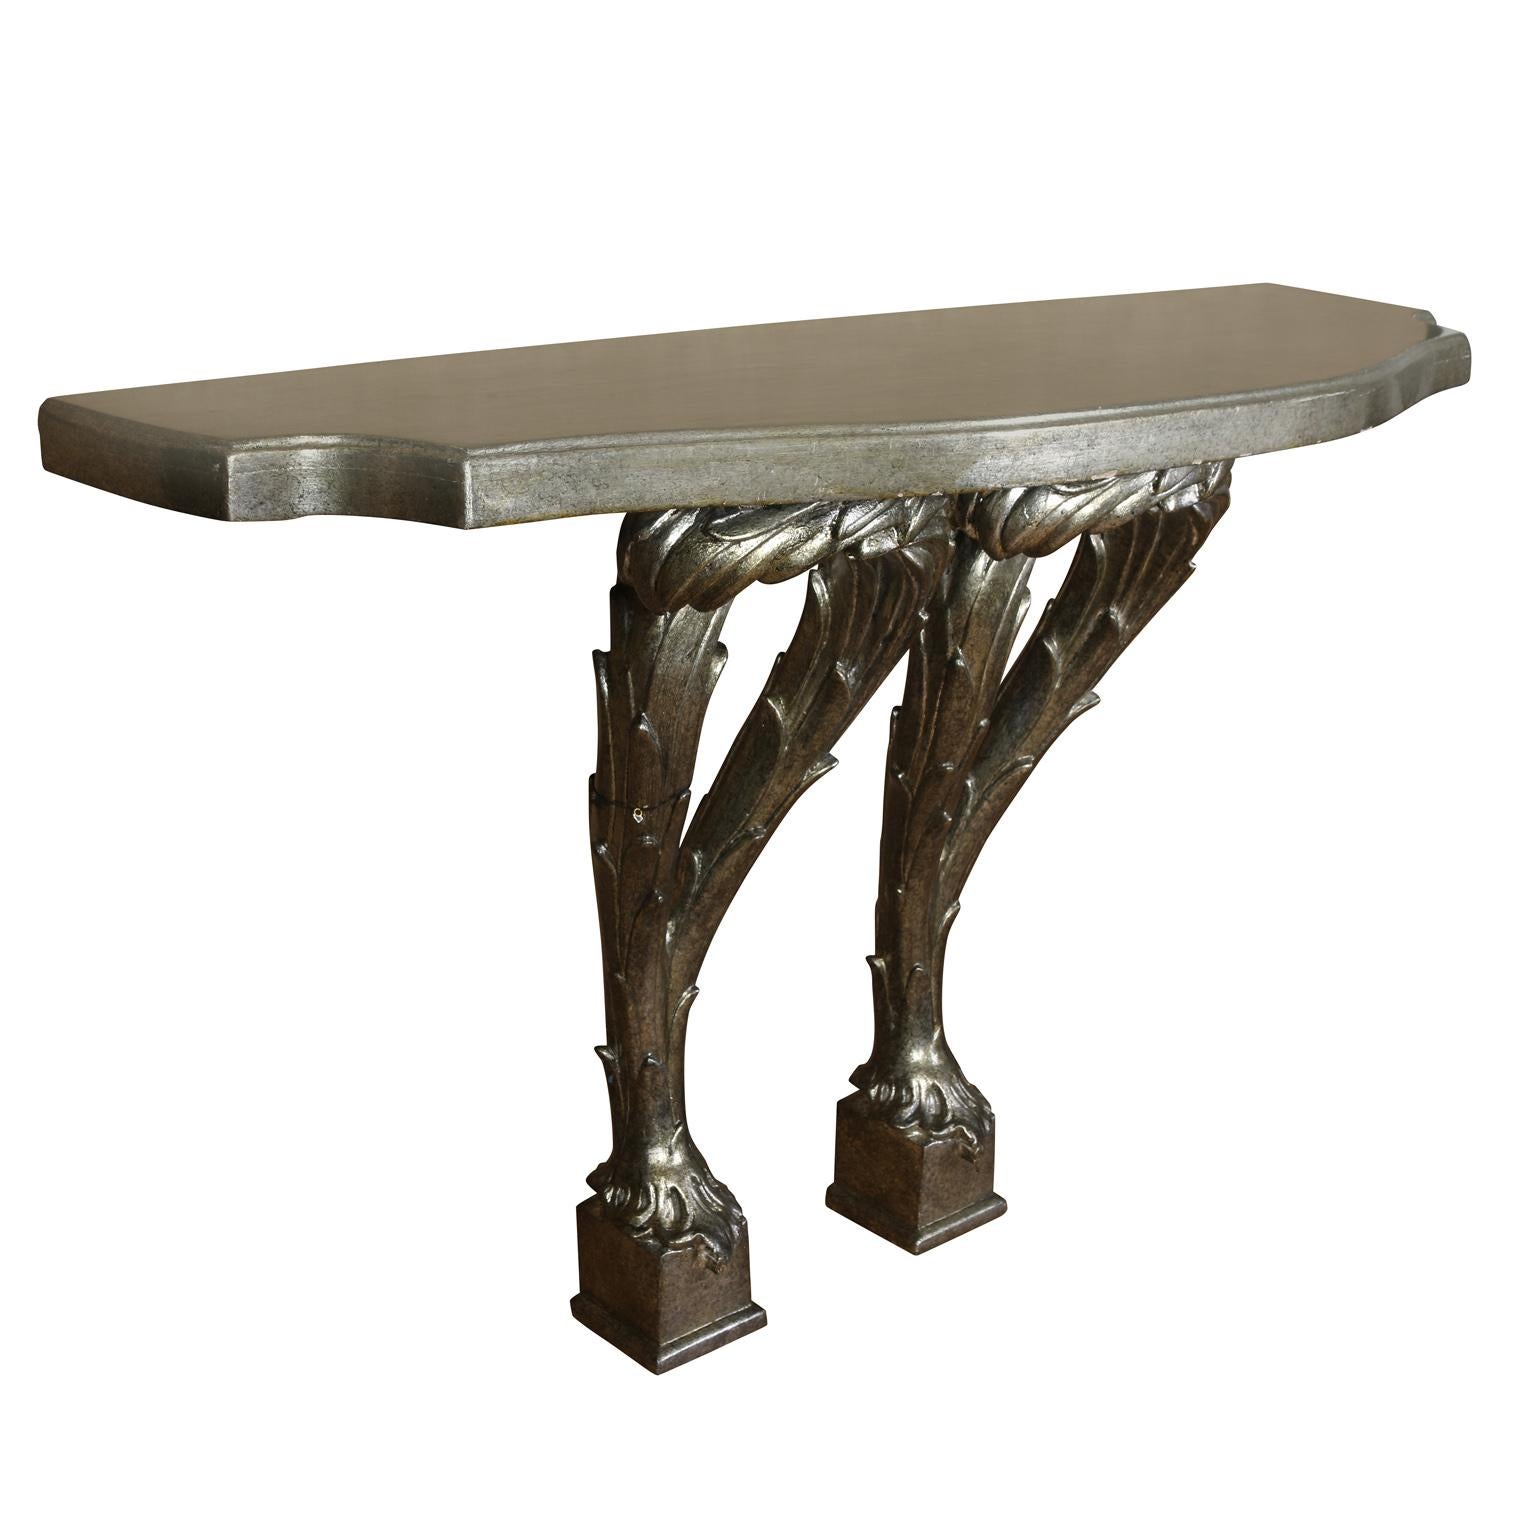 A vintage John Rosselli silver leaf console table in Serge Roche style with a double pedestal.